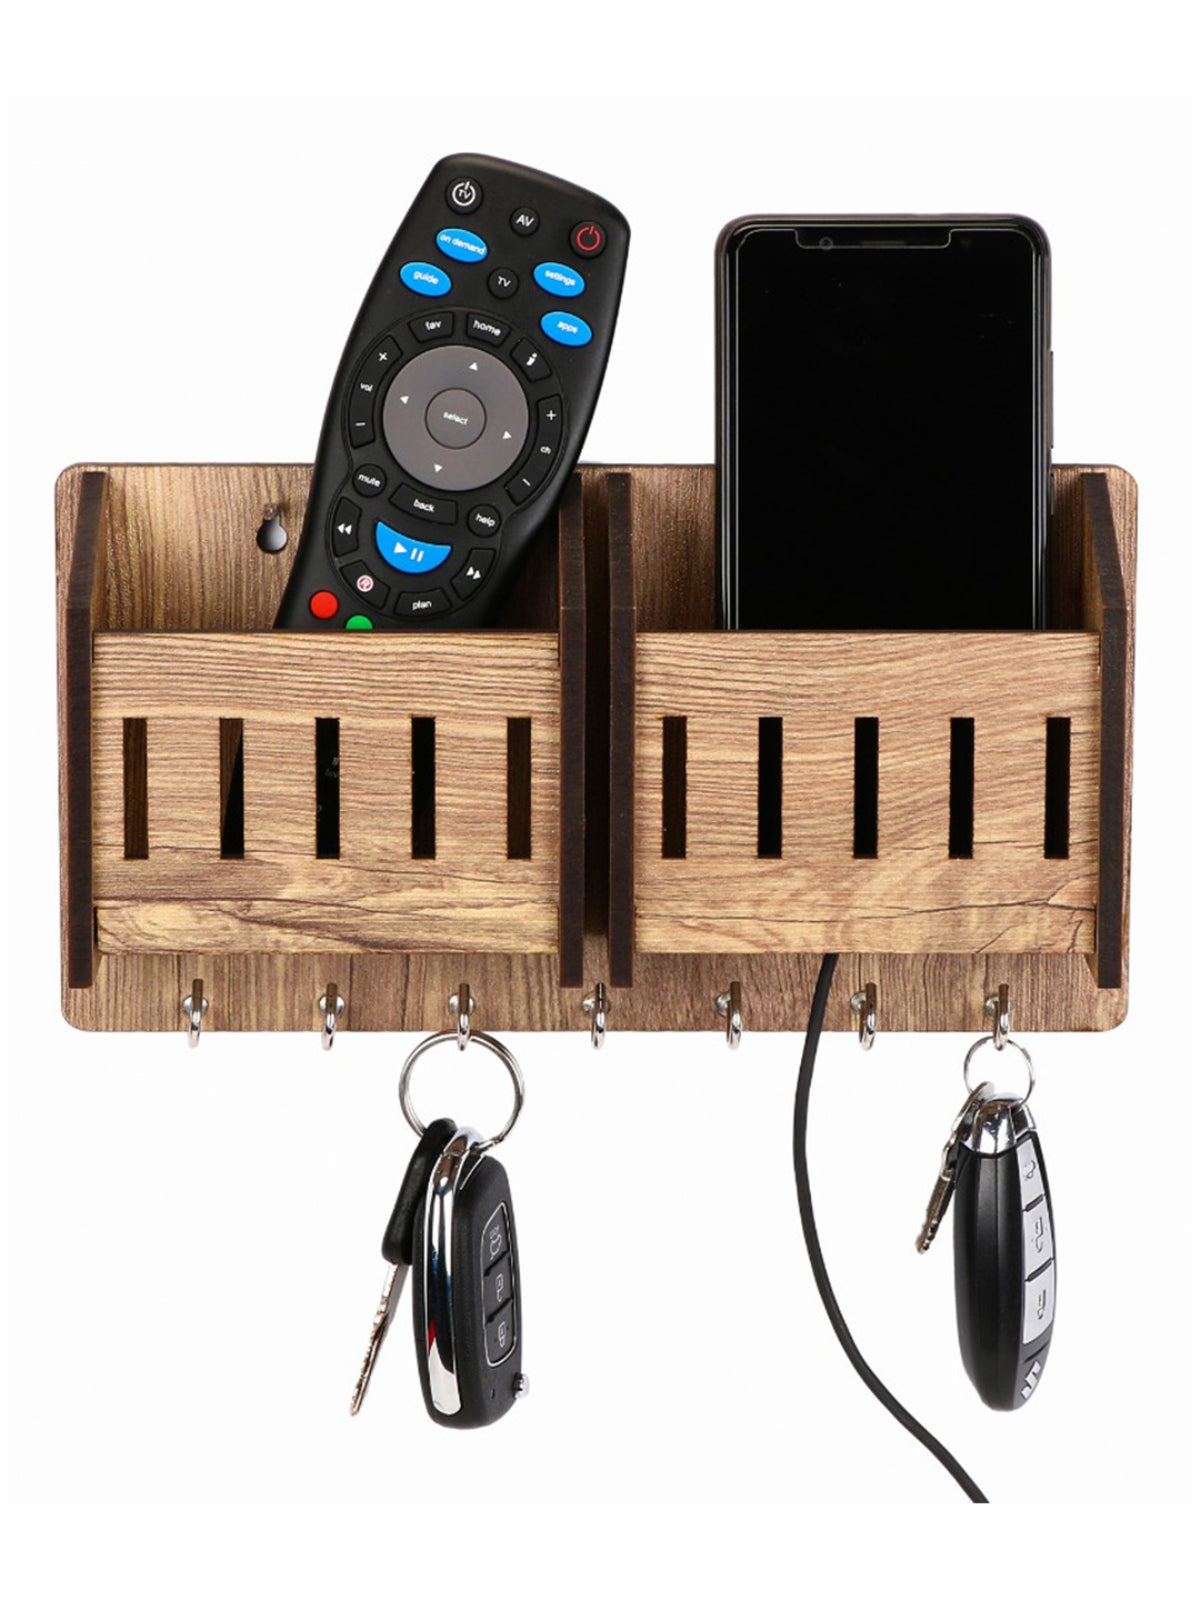 Wooden Key Holder With 2 Mobile & Magazine Organizer, Home & Office Wall Decorative